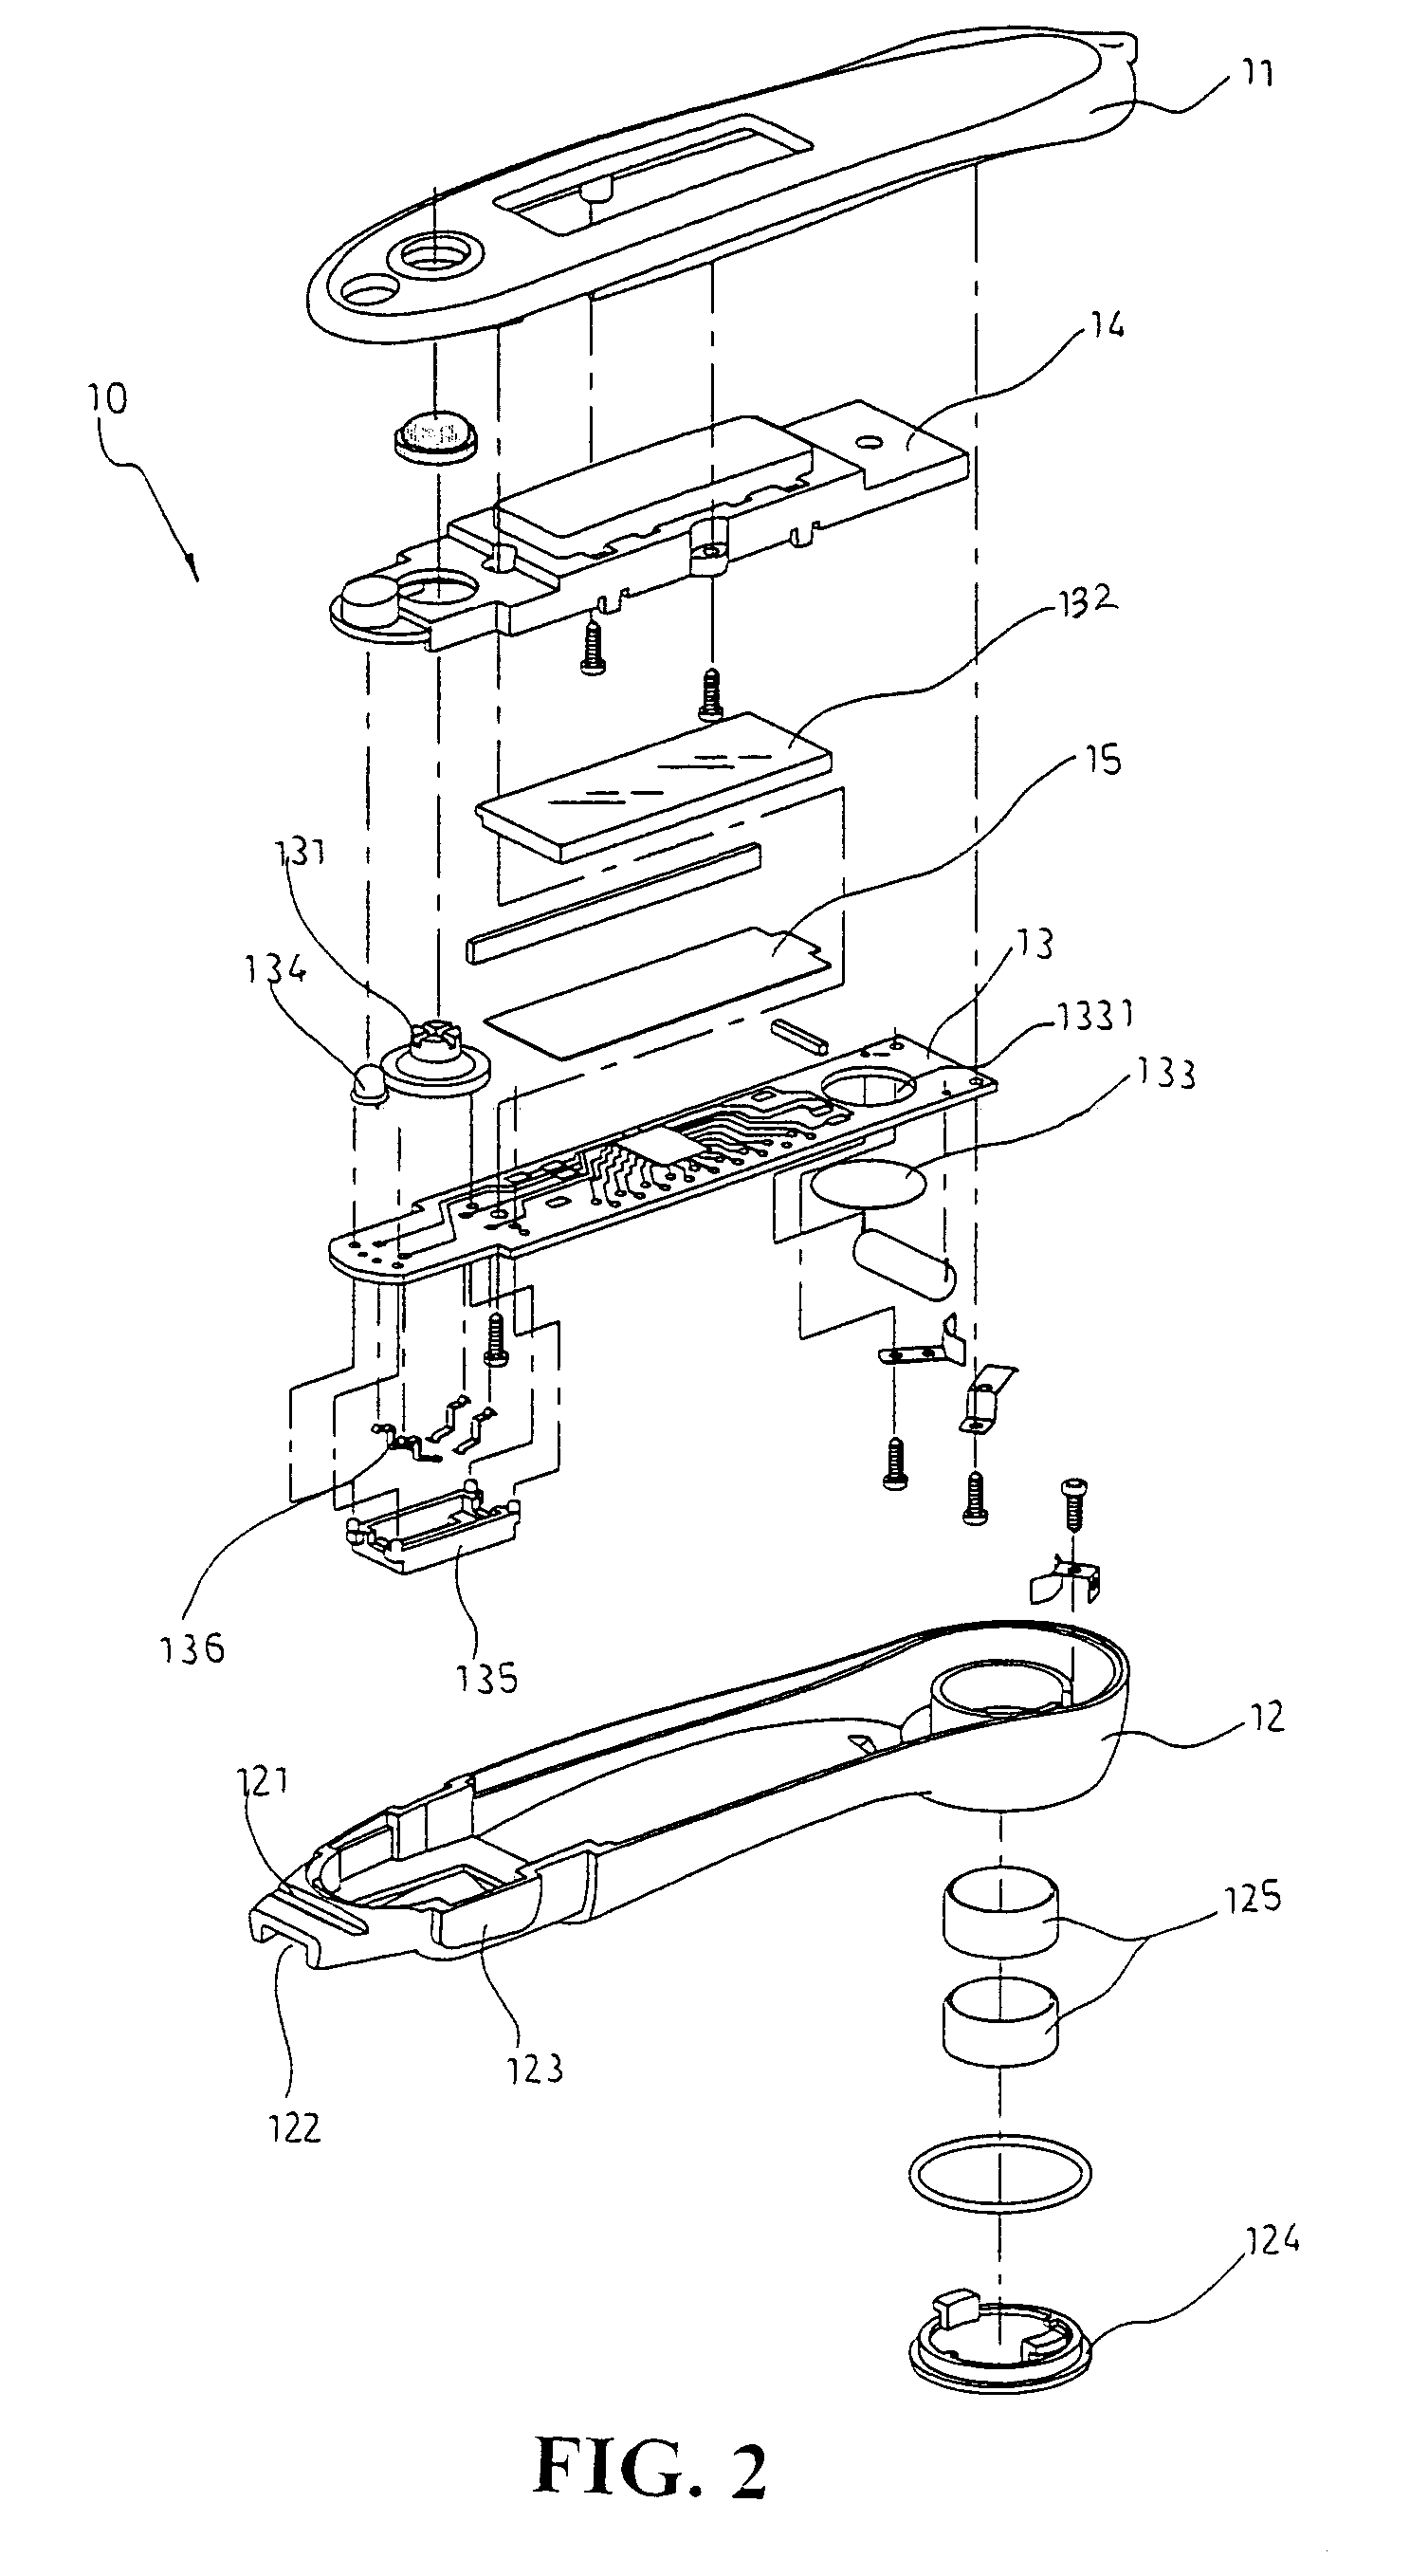 Assembly method and structure of an electronic clinical thermometer